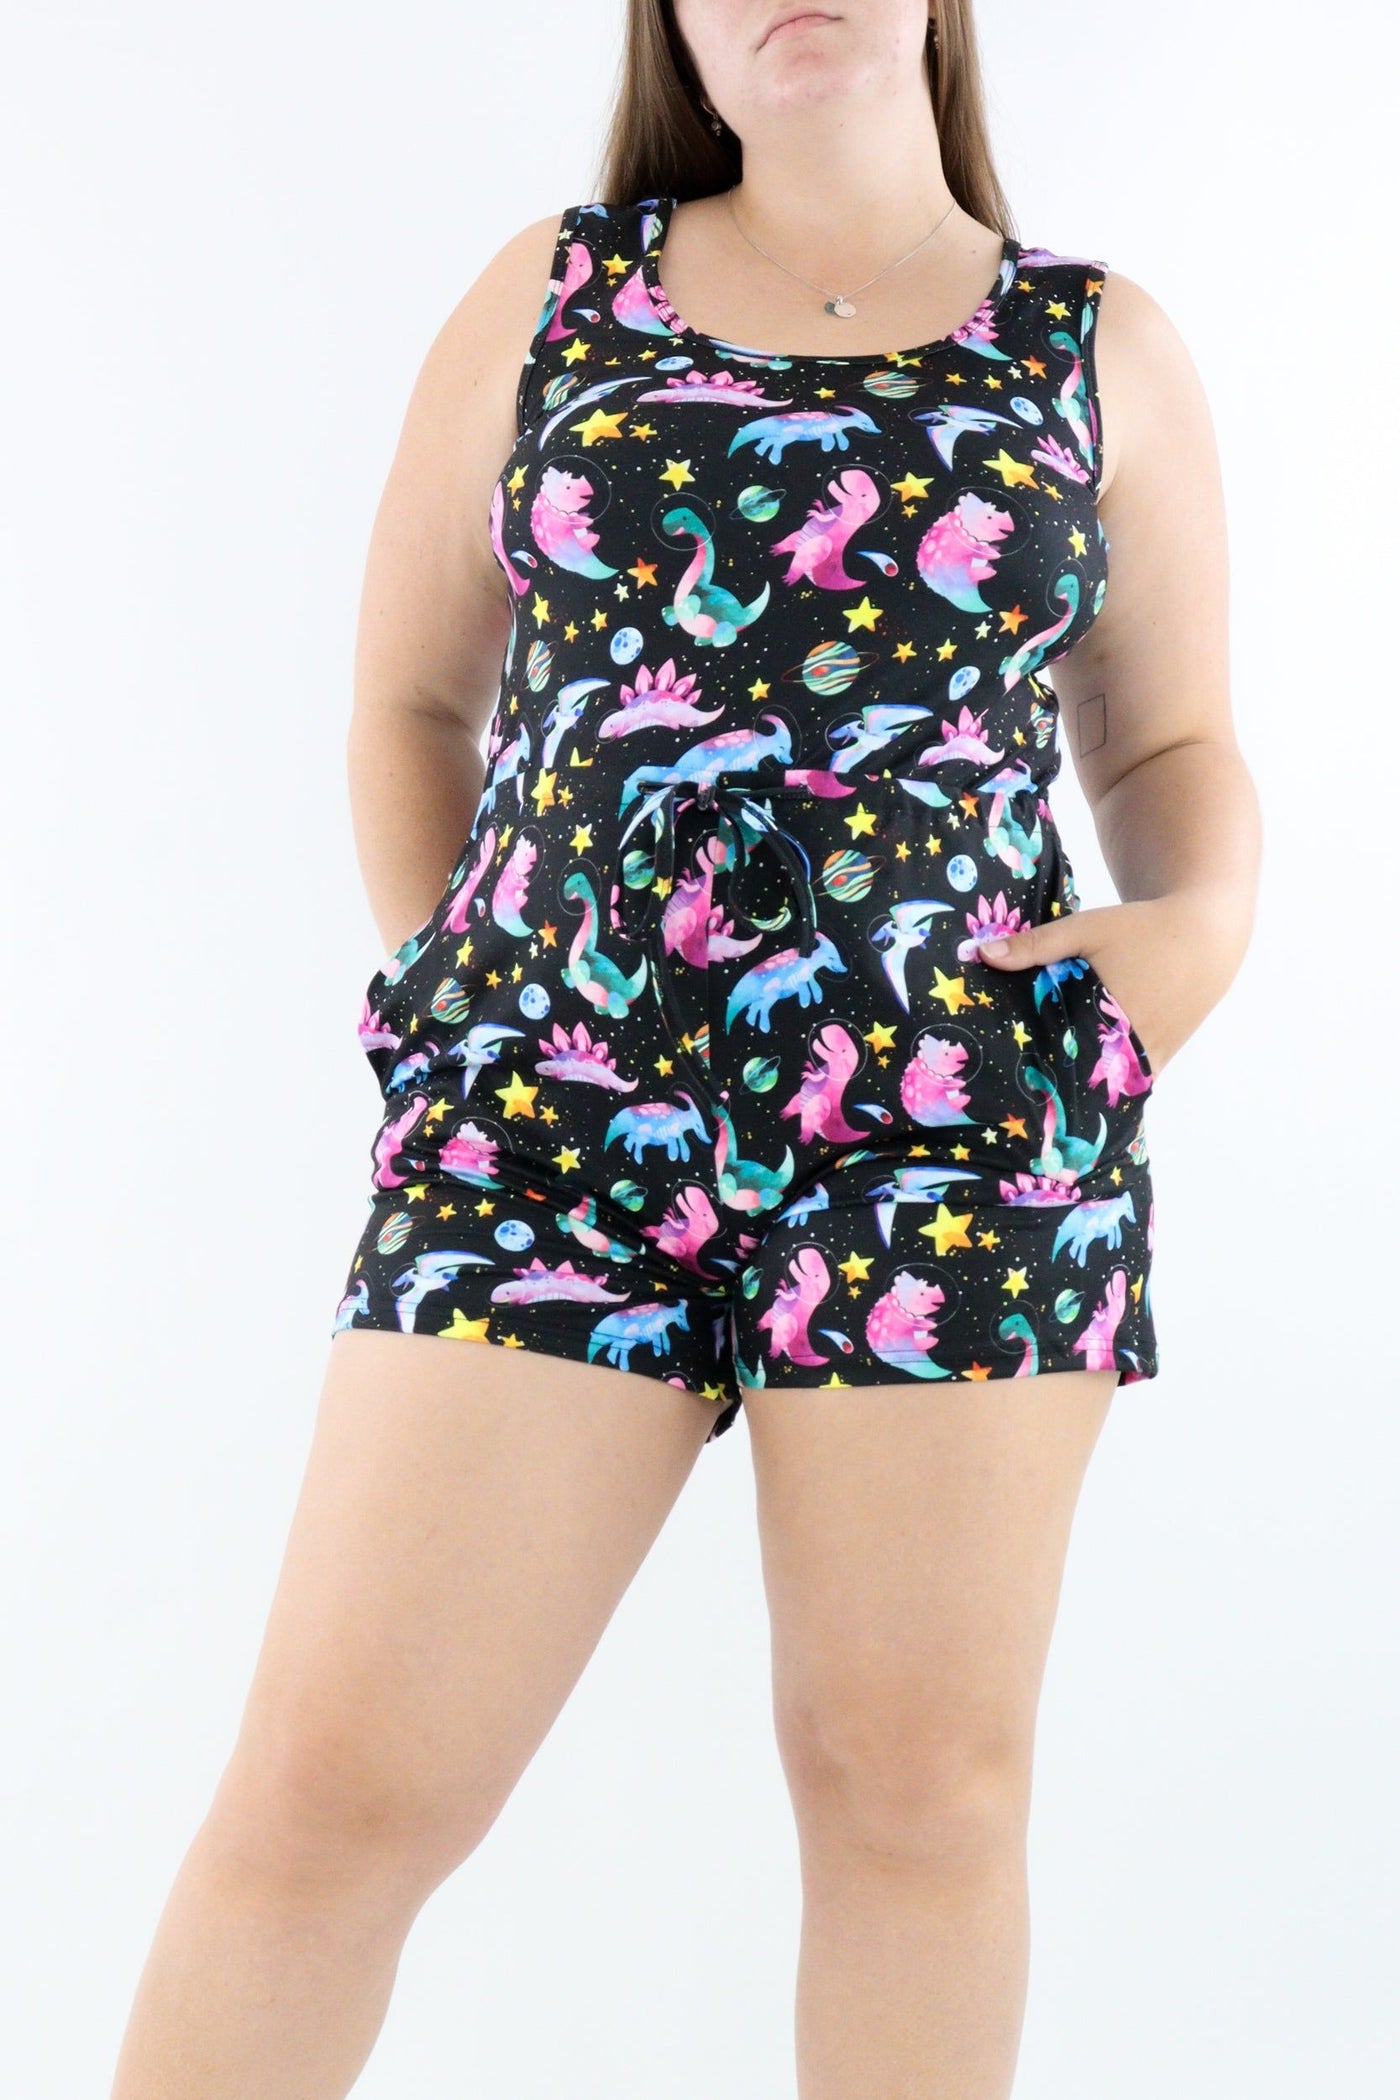 Dinosaurs in Space - Playsuit Shorts - Sleeveless - Pockets - Pawlie